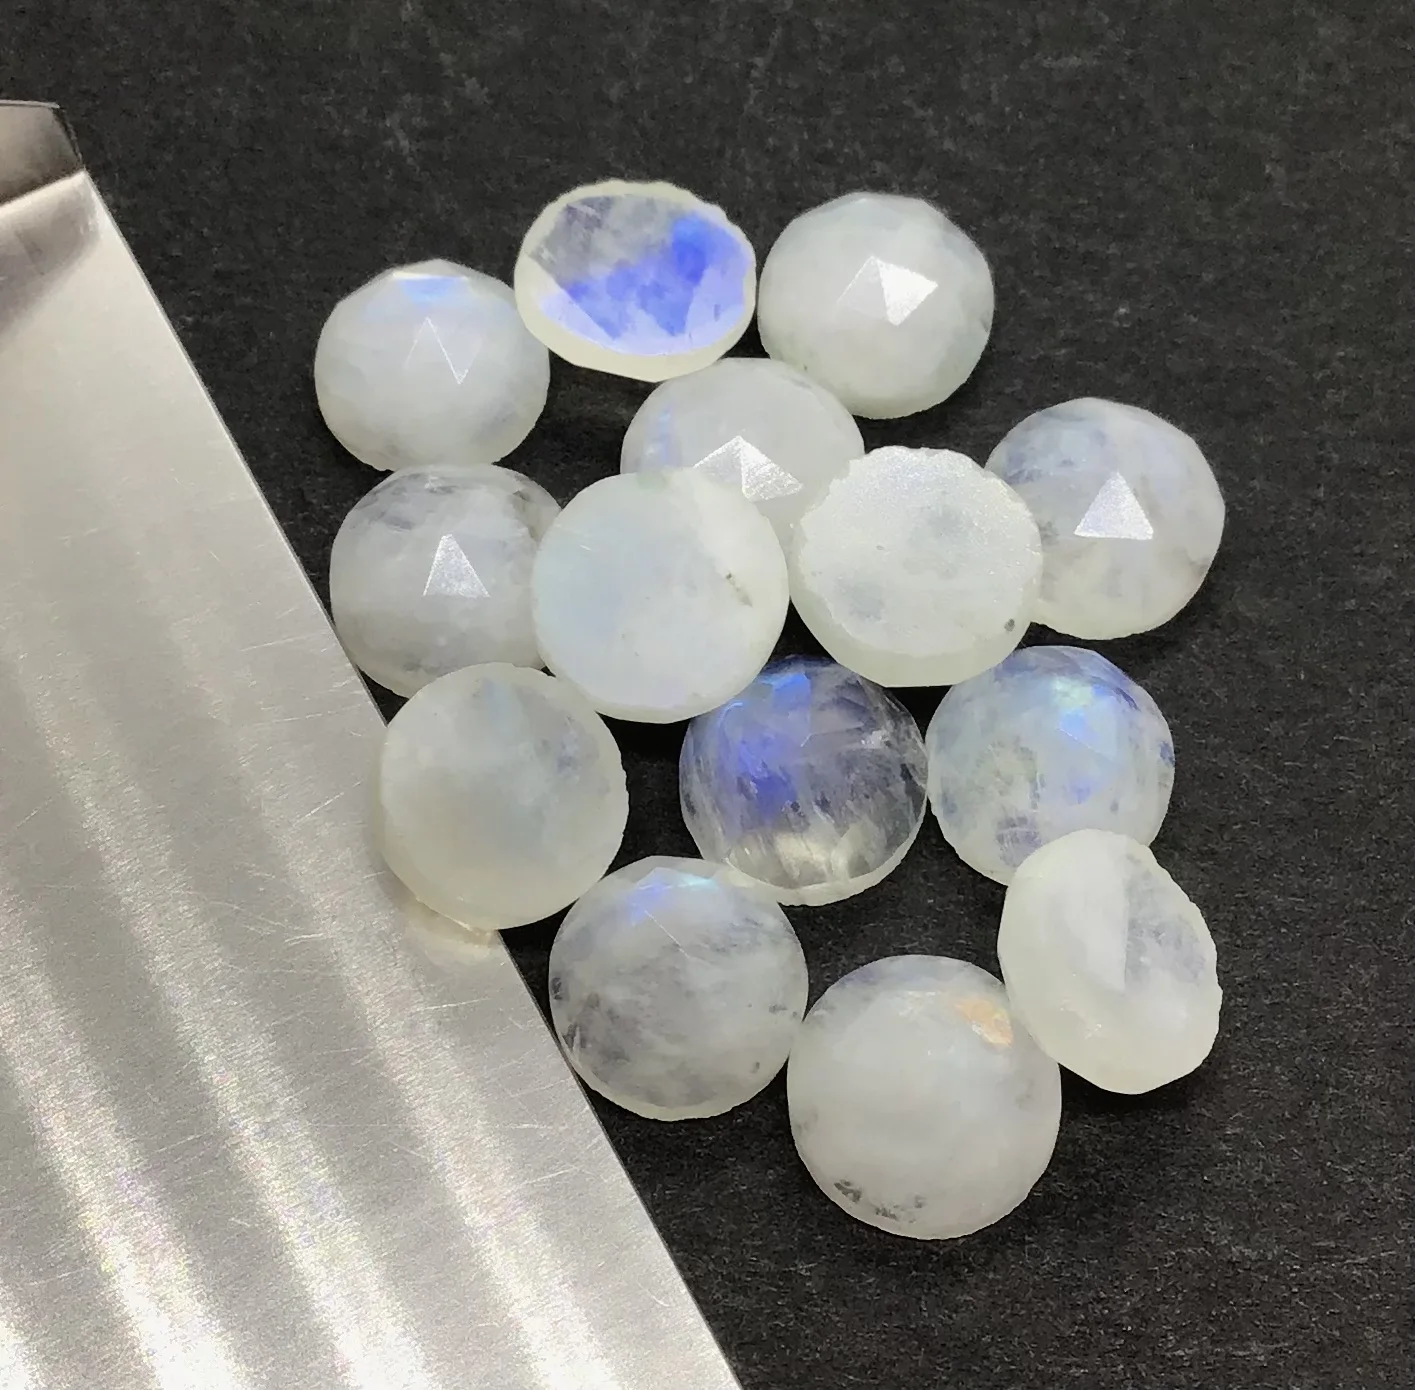 Rainbow Moonstone 5mm 6mm 7mm 8mm 9mm TO 12mm Round Gemstone Loose Natural  Rainbow Moonstone Faceted Loose Gemstone for Jewelry Making 